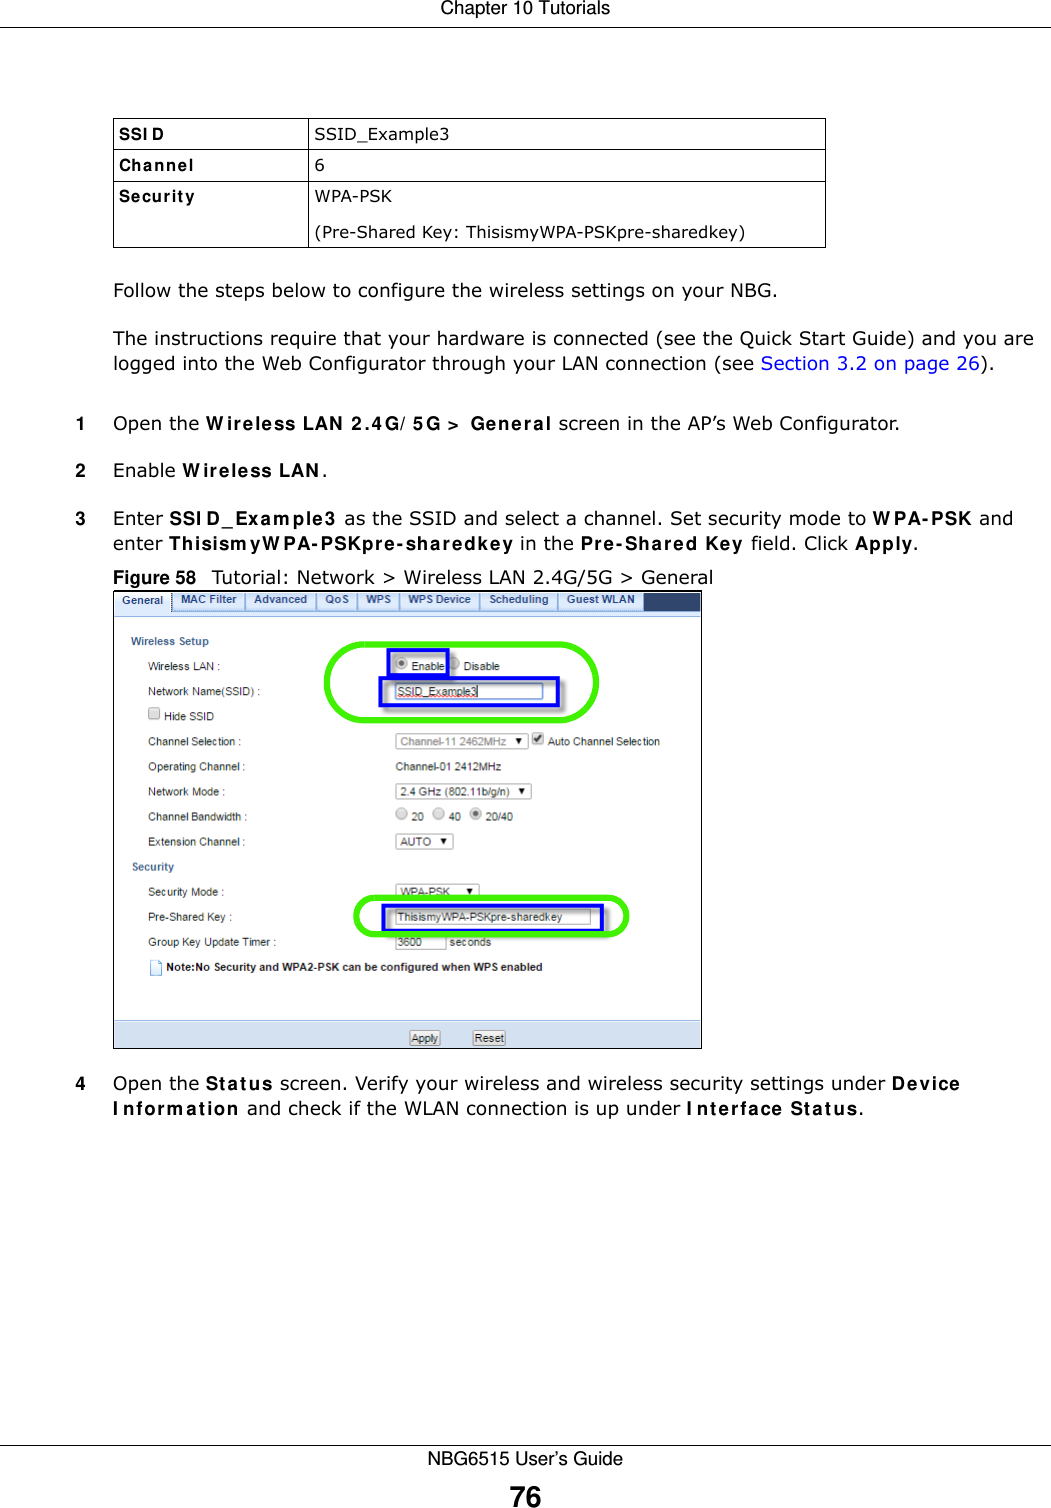 Chapter 10 TutorialsNBG6515 User’s Guide76Follow the steps below to configure the wireless settings on your NBG.The instructions require that your hardware is connected (see the Quick Start Guide) and you are logged into the Web Configurator through your LAN connection (see Section 3.2 on page 26).1Open the Wireless LAN 2.4G/5G &gt; General screen in the AP’s Web Configurator.2Enable Wireless LAN.3Enter SSID_Example3 as the SSID and select a channel. Set security mode to WPA-PSK and enter ThisismyWPA-PSKpre-sharedkey in the Pre-Shared Key field. Click Apply.Figure 58   Tutorial: Network &gt; Wireless LAN 2.4G/5G &gt; General4Open the Status screen. Verify your wireless and wireless security settings under Device Information and check if the WLAN connection is up under Interface Status.SSID SSID_Example3Channel 6Security  WPA-PSK(Pre-Shared Key: ThisismyWPA-PSKpre-sharedkey)